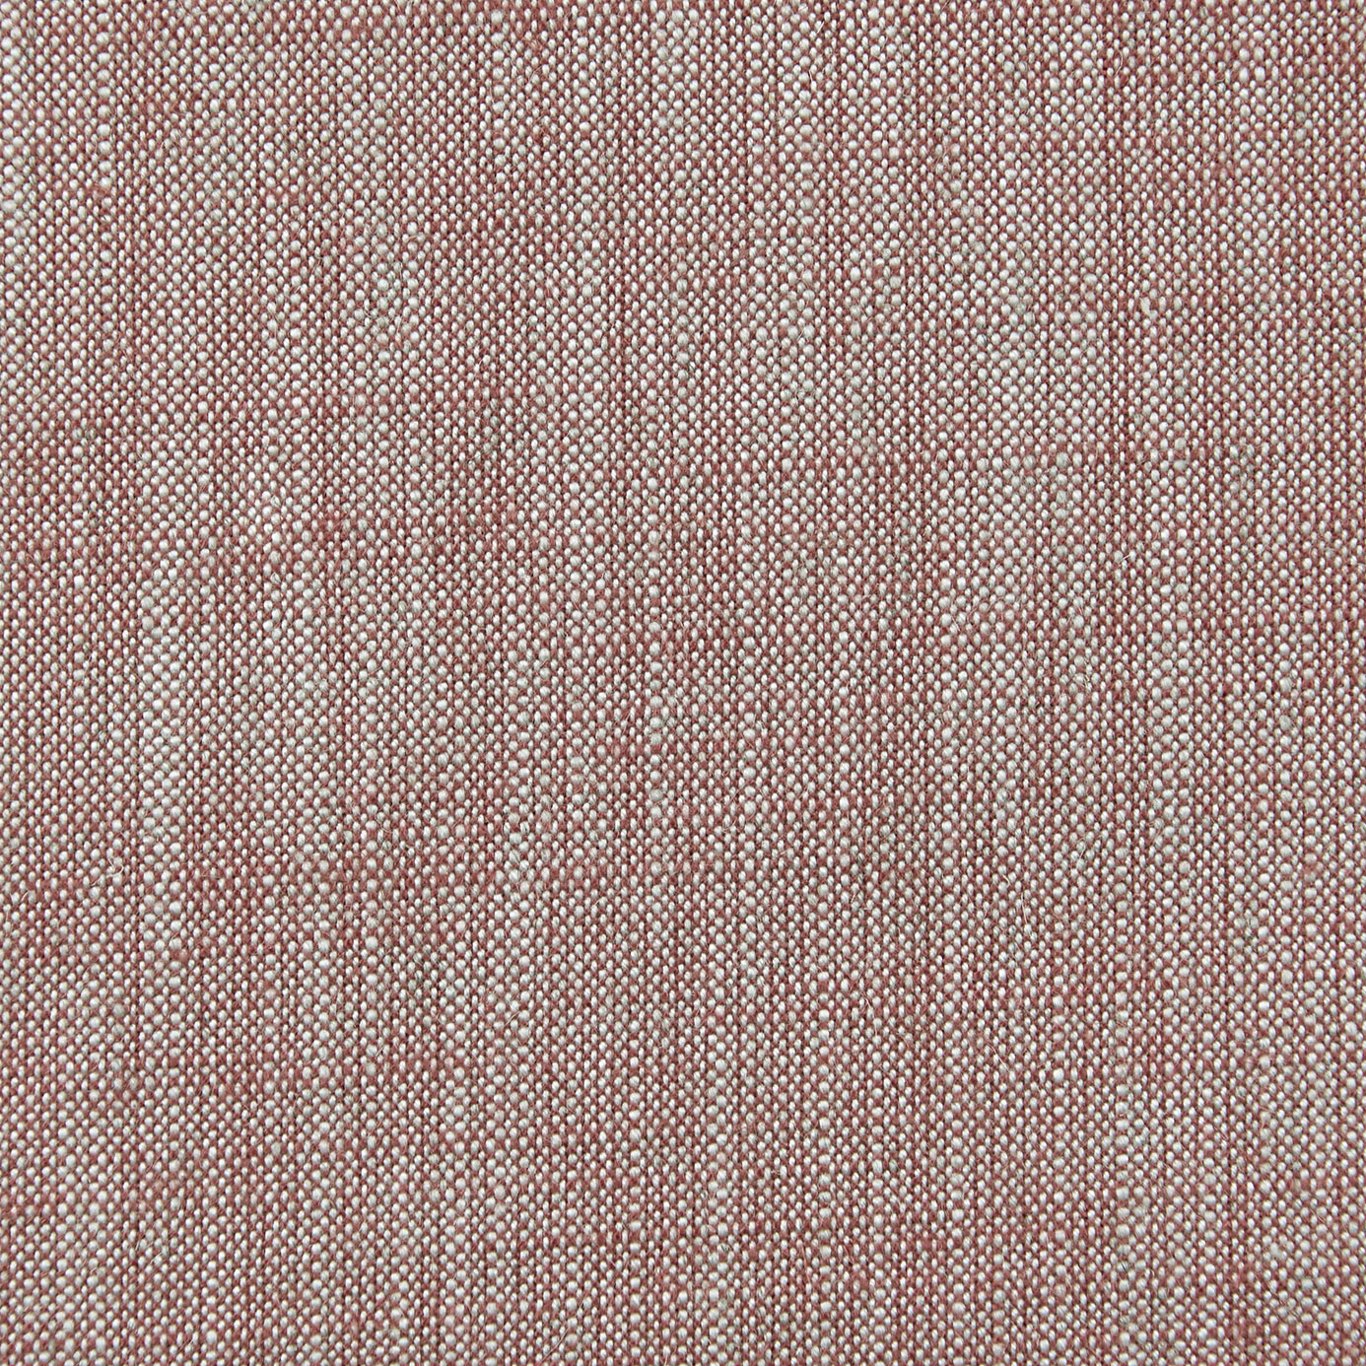 Biarritz Rose Fabric by CNC